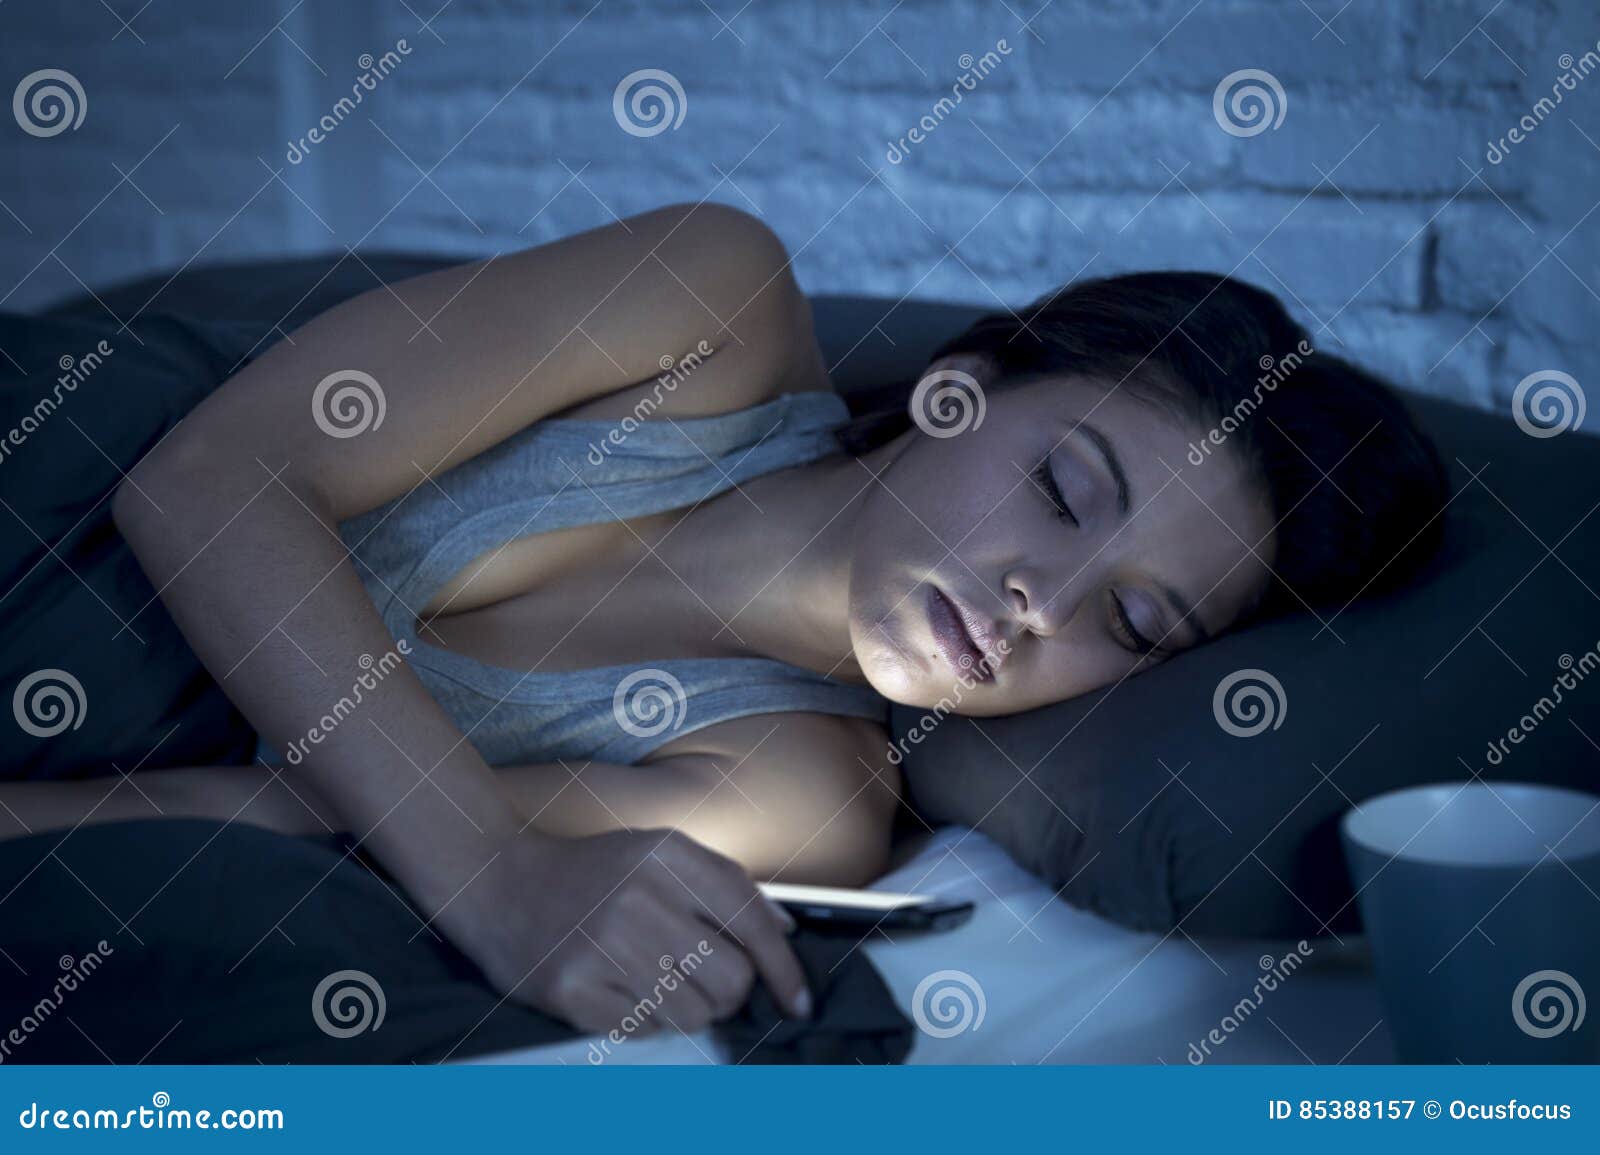 young beautiful latin woman on bed late at night texting using mobile phone tired falling sleep